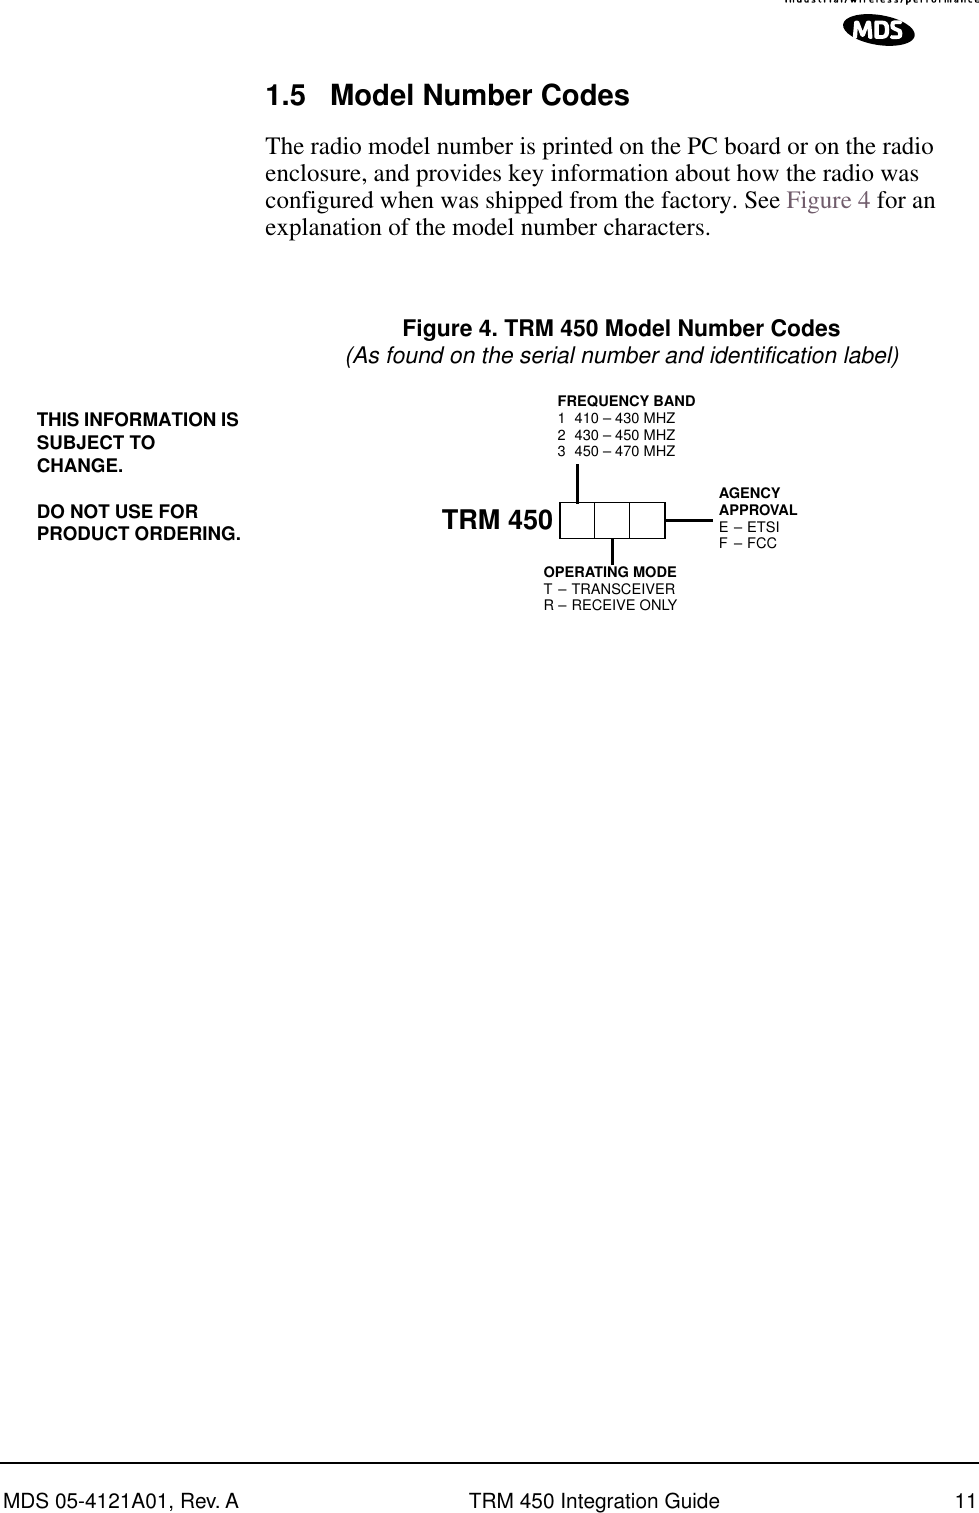  MDS 05-4121A01, Rev. A TRM 450 Integration Guide 11 1.5 Model Number Codes The radio model number is printed on the PC board or on the radio enclosure, and provides key information about how the radio was configured when was shipped from the factory. See Figure 4 for an explanation of the model number characters. Invisible place holder Figure 4. TRM 450 Model Number Codes (As found on the serial number and identification label)      OPERATING MODET–TRANSCEIVERR–RECEIVE ONLYTRM 450FREQUENCY BAND1 410 – 430 MHZ2 430 – 450 MHZ3 450 – 470 MHZAGENCY APPROVALE–ETSIF–FCCTHIS INFORMATION IS SUBJECT TO CHANGE.DO NOT USE FOR PRODUCT ORDERING.